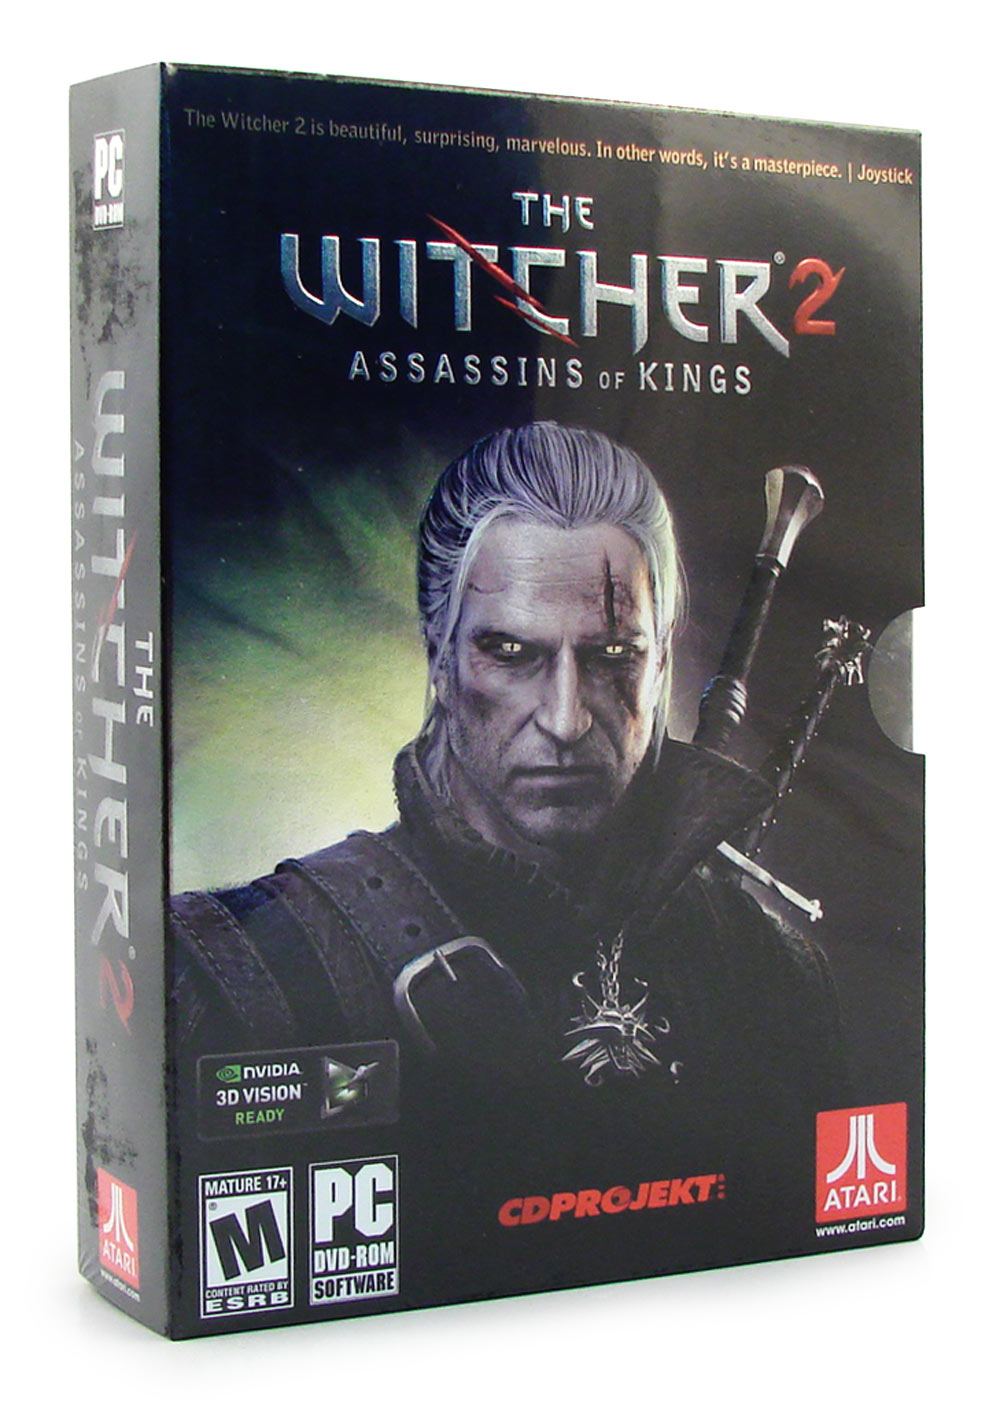 The Witcher 2: Assassins of (DVD-ROM) for Windows